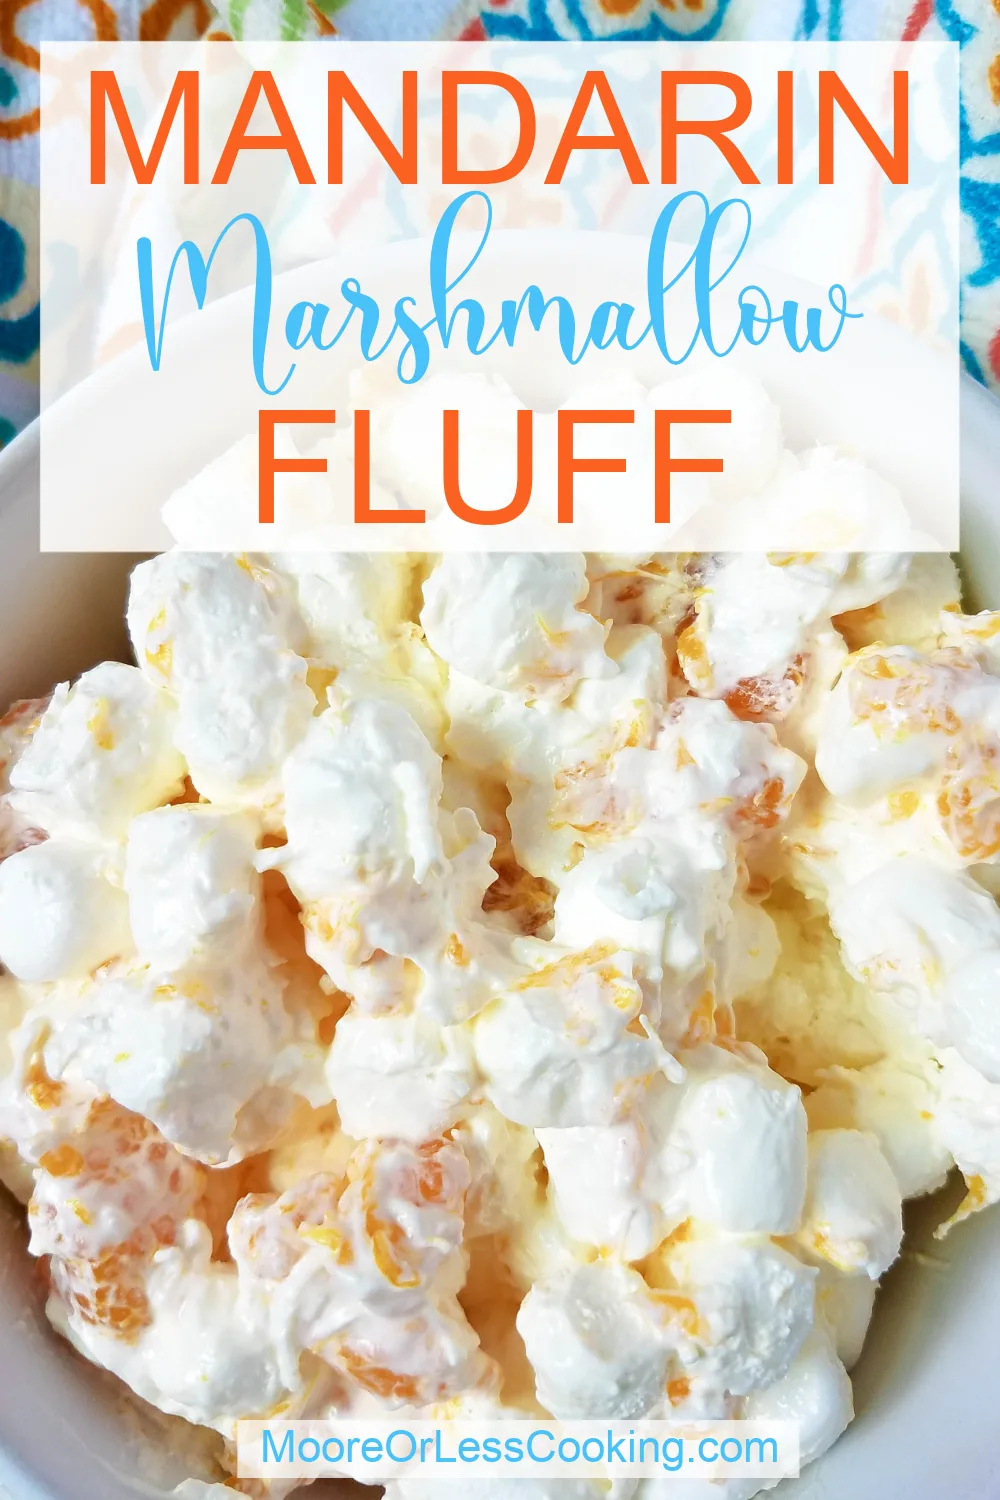 Sweet, light, fruity, and easy are the hallmarks of this Mandarin Marshmallow Fluff no-bake dessert. Perfect for potlucks, BBQs, and holiday events, this easy dessert salad recipe is always a crowd-pleaser. via @Mooreorlesscook